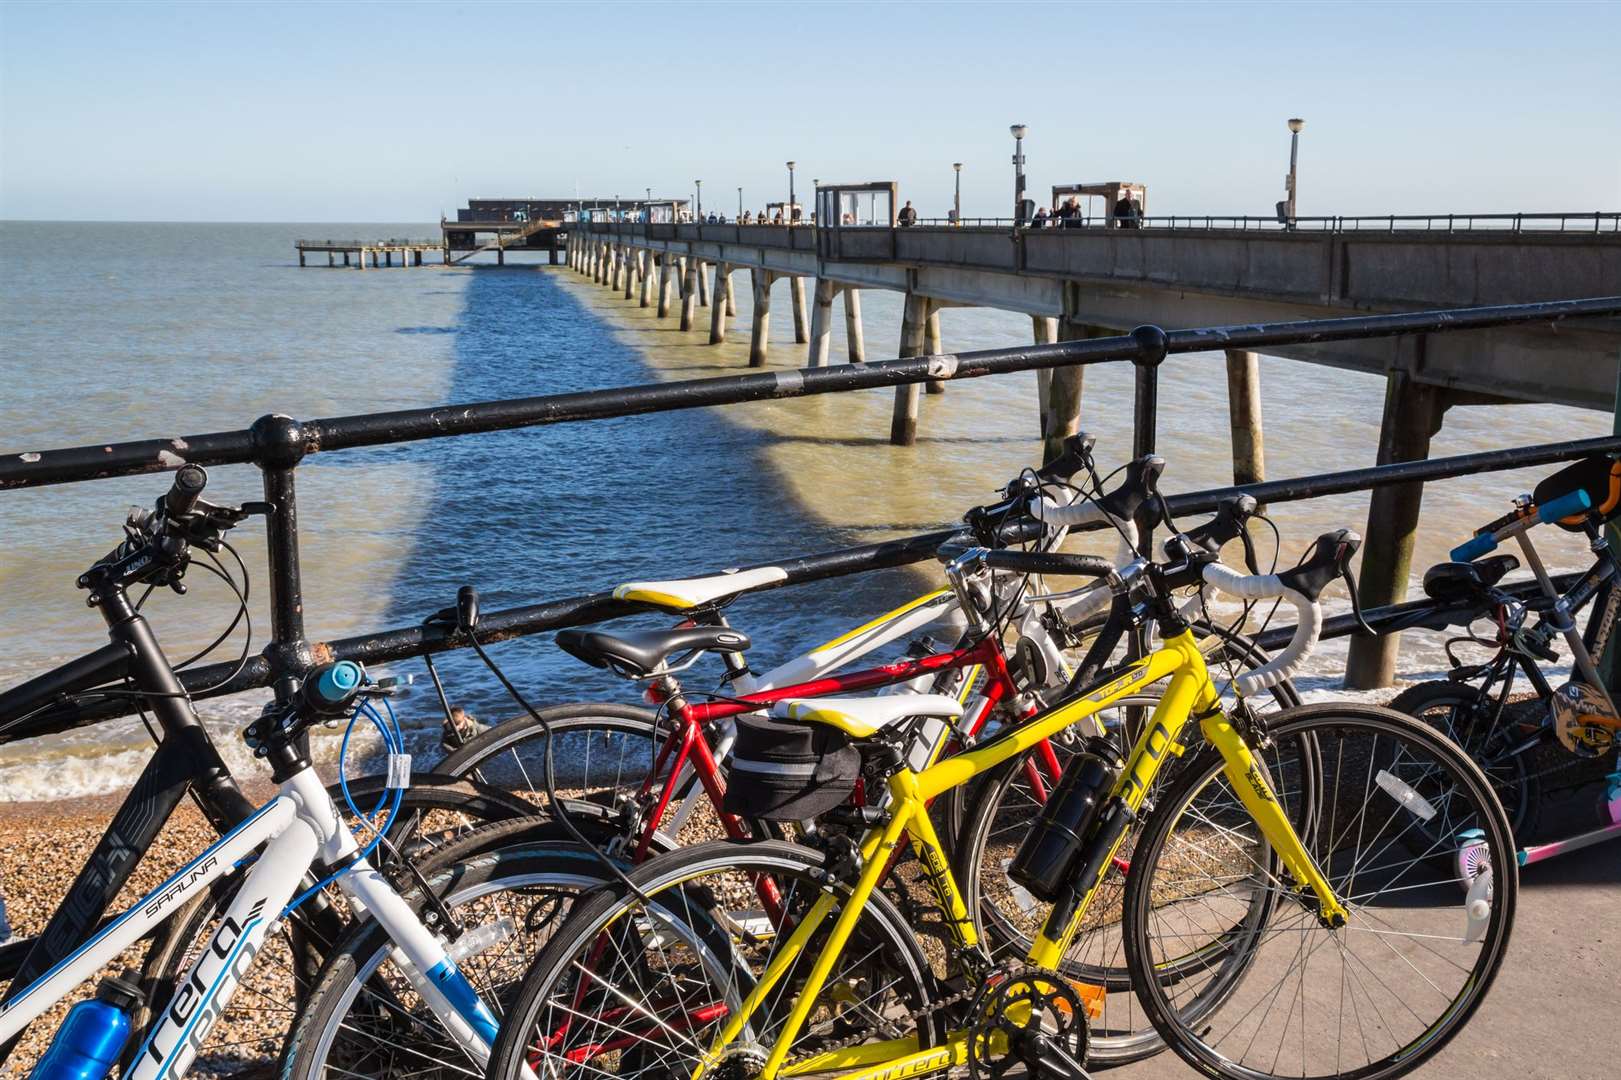 Ride out to Deal and its pier